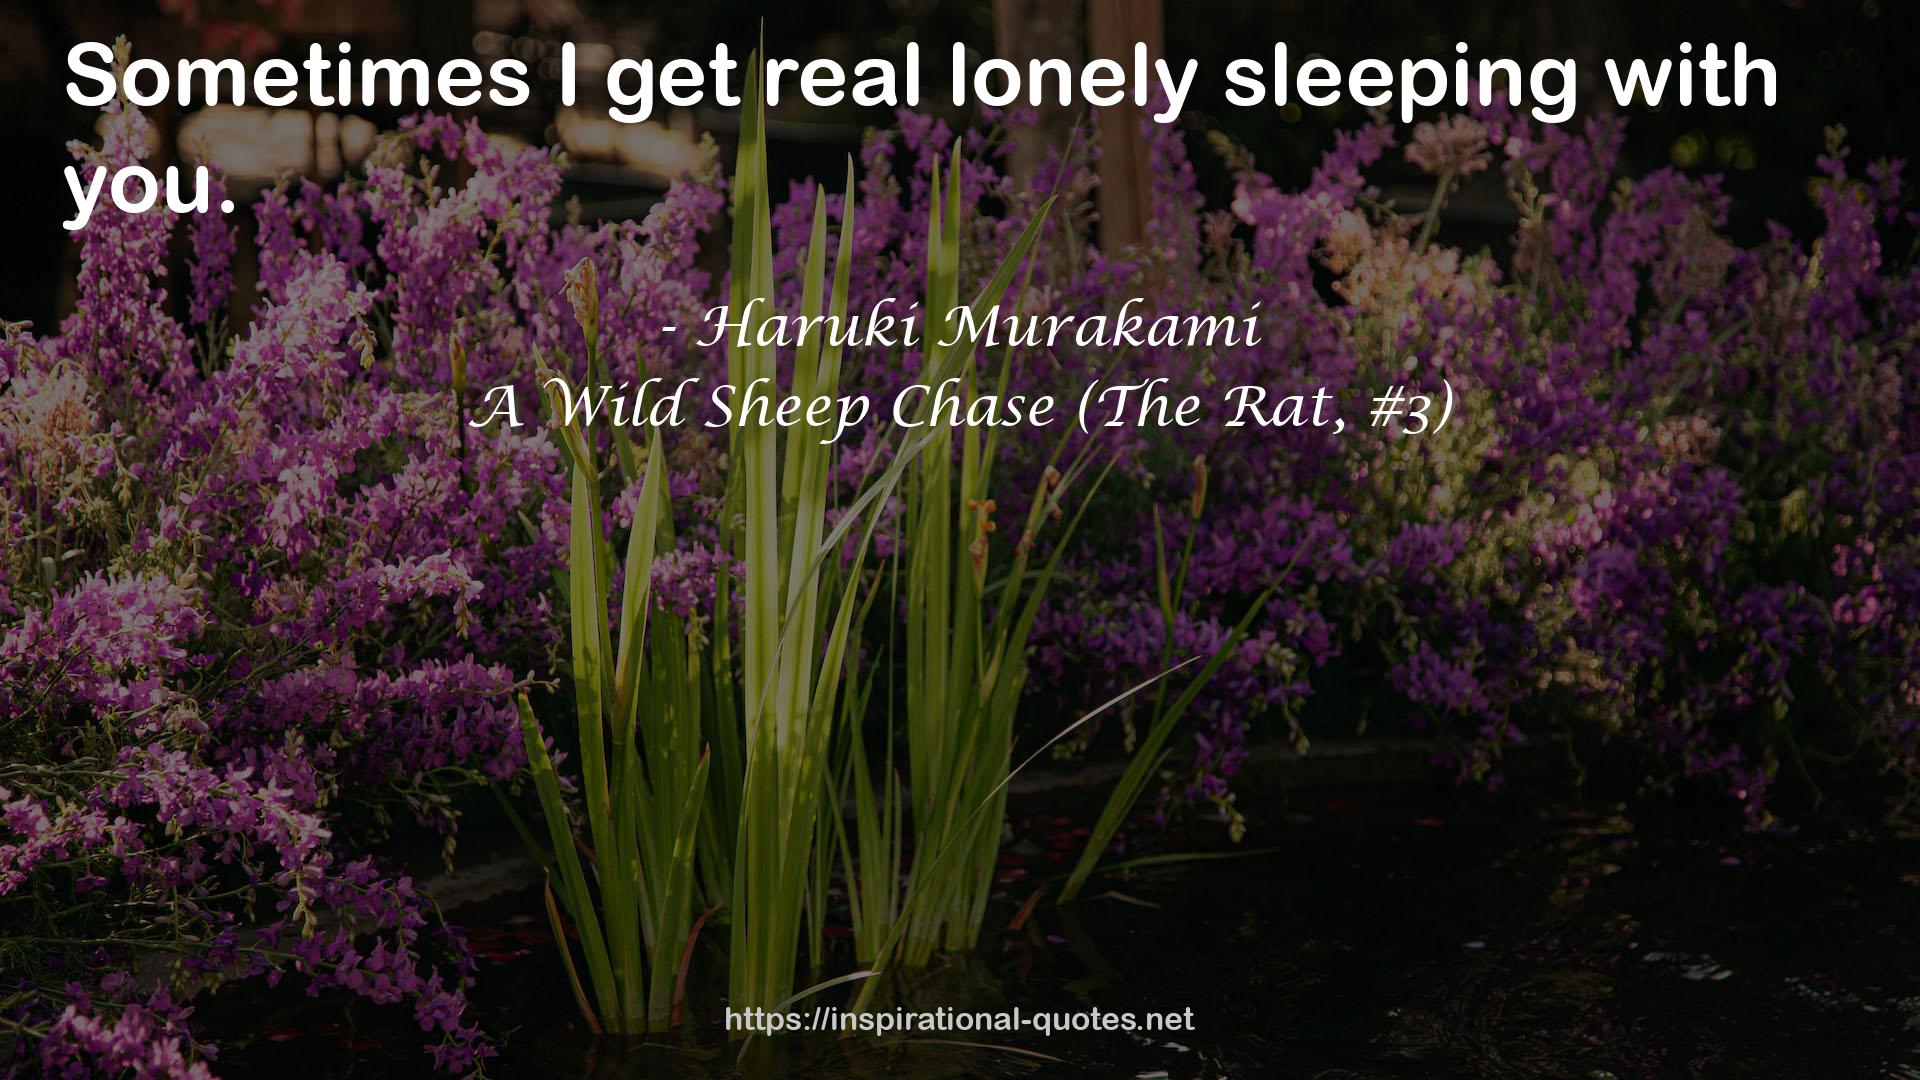 A Wild Sheep Chase (The Rat, #3) QUOTES